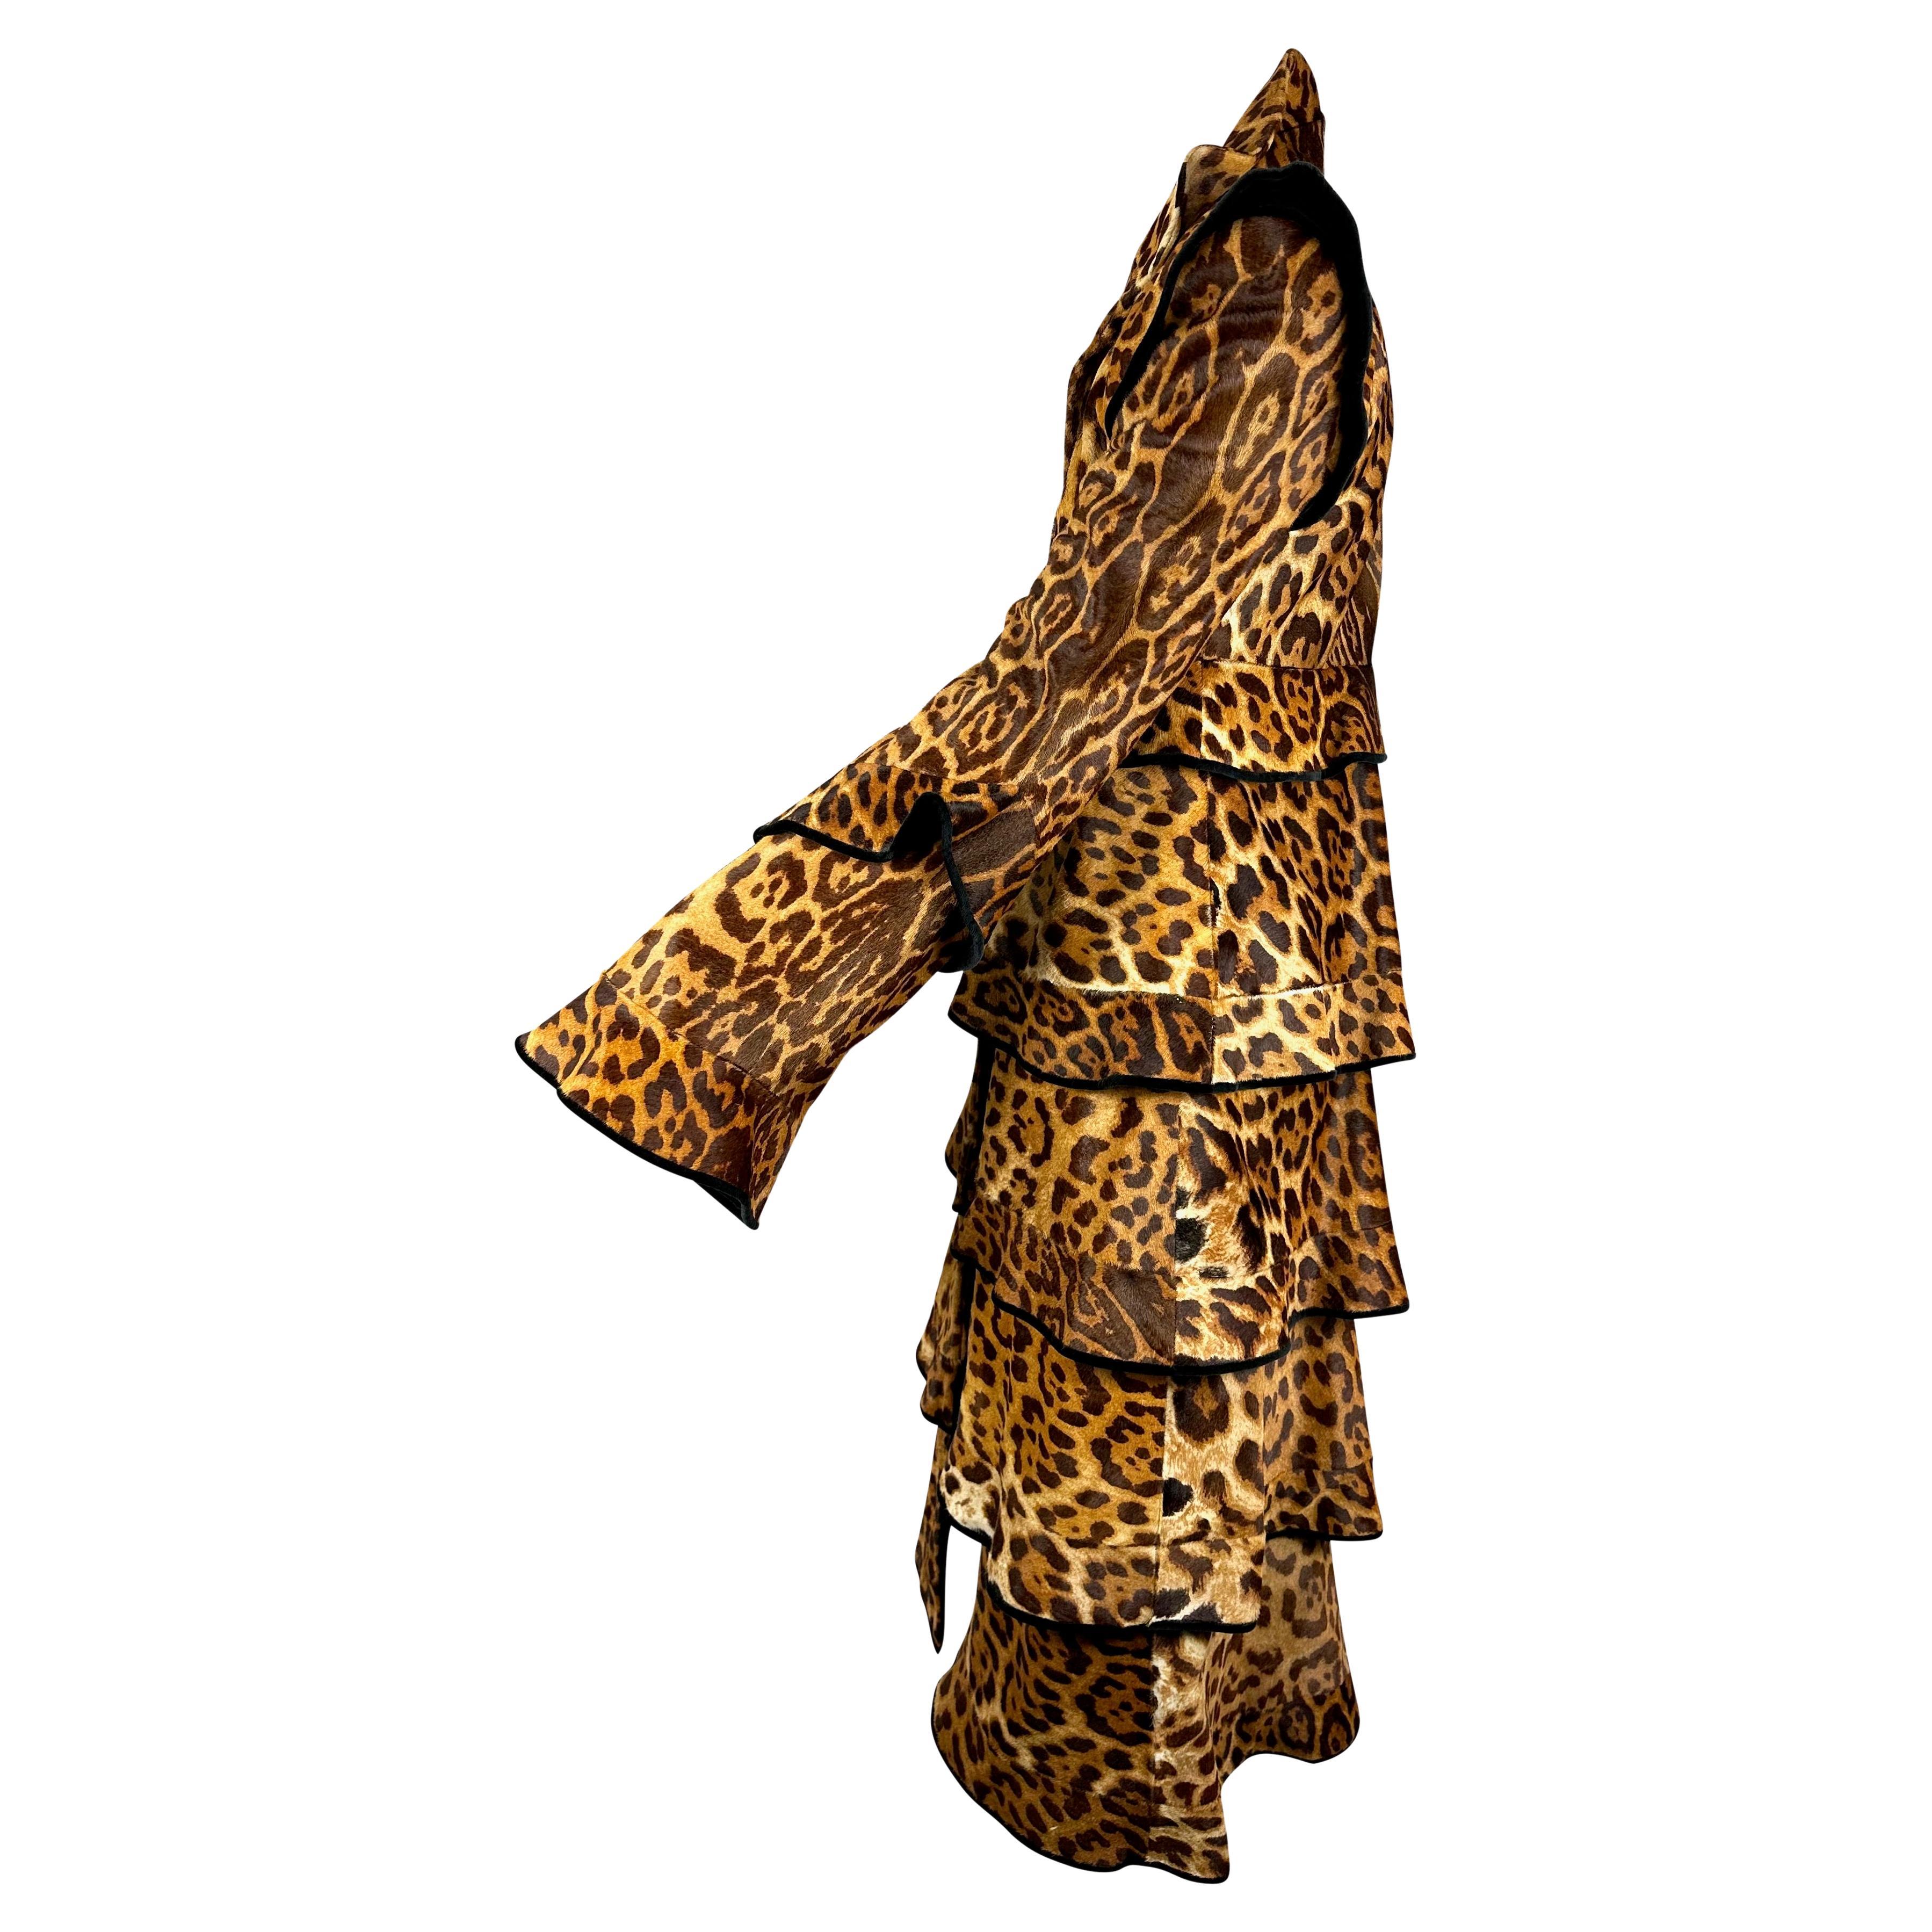 F/W 2004 Yves Saint Laurent by Tom Ford Cheetah Print Pony Hair Trench Coat In Excellent Condition For Sale In West Hollywood, CA